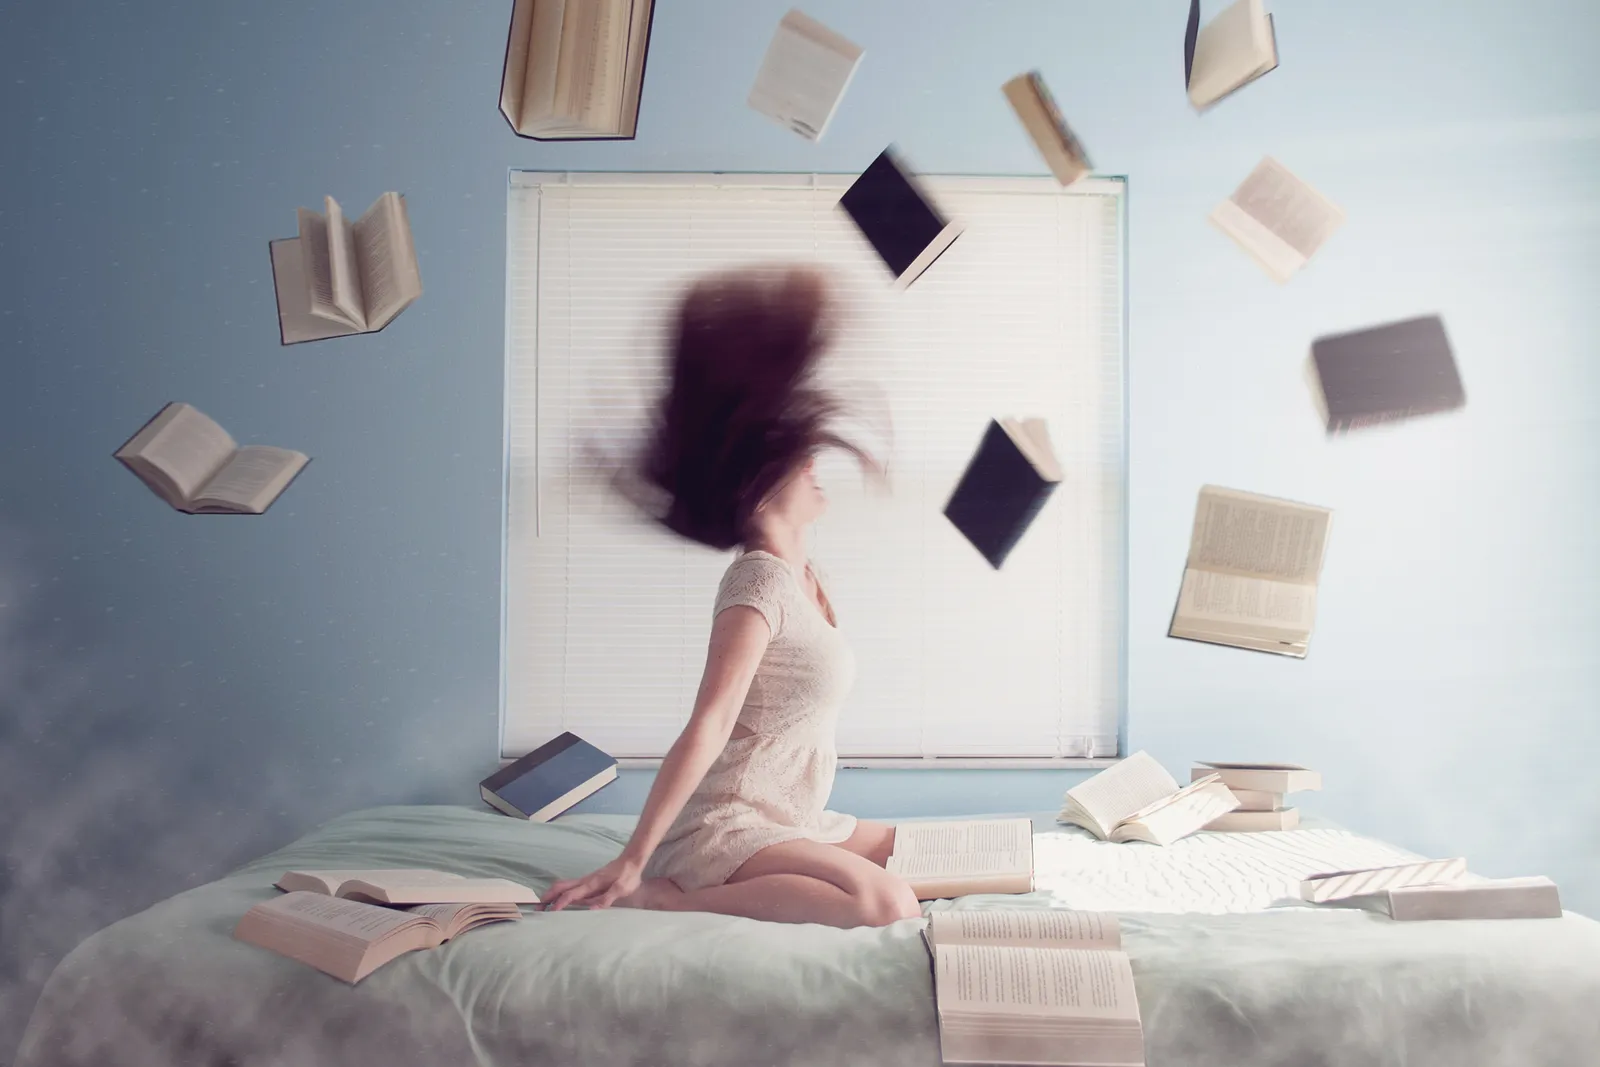 Girl throwing hair back surrounded by books